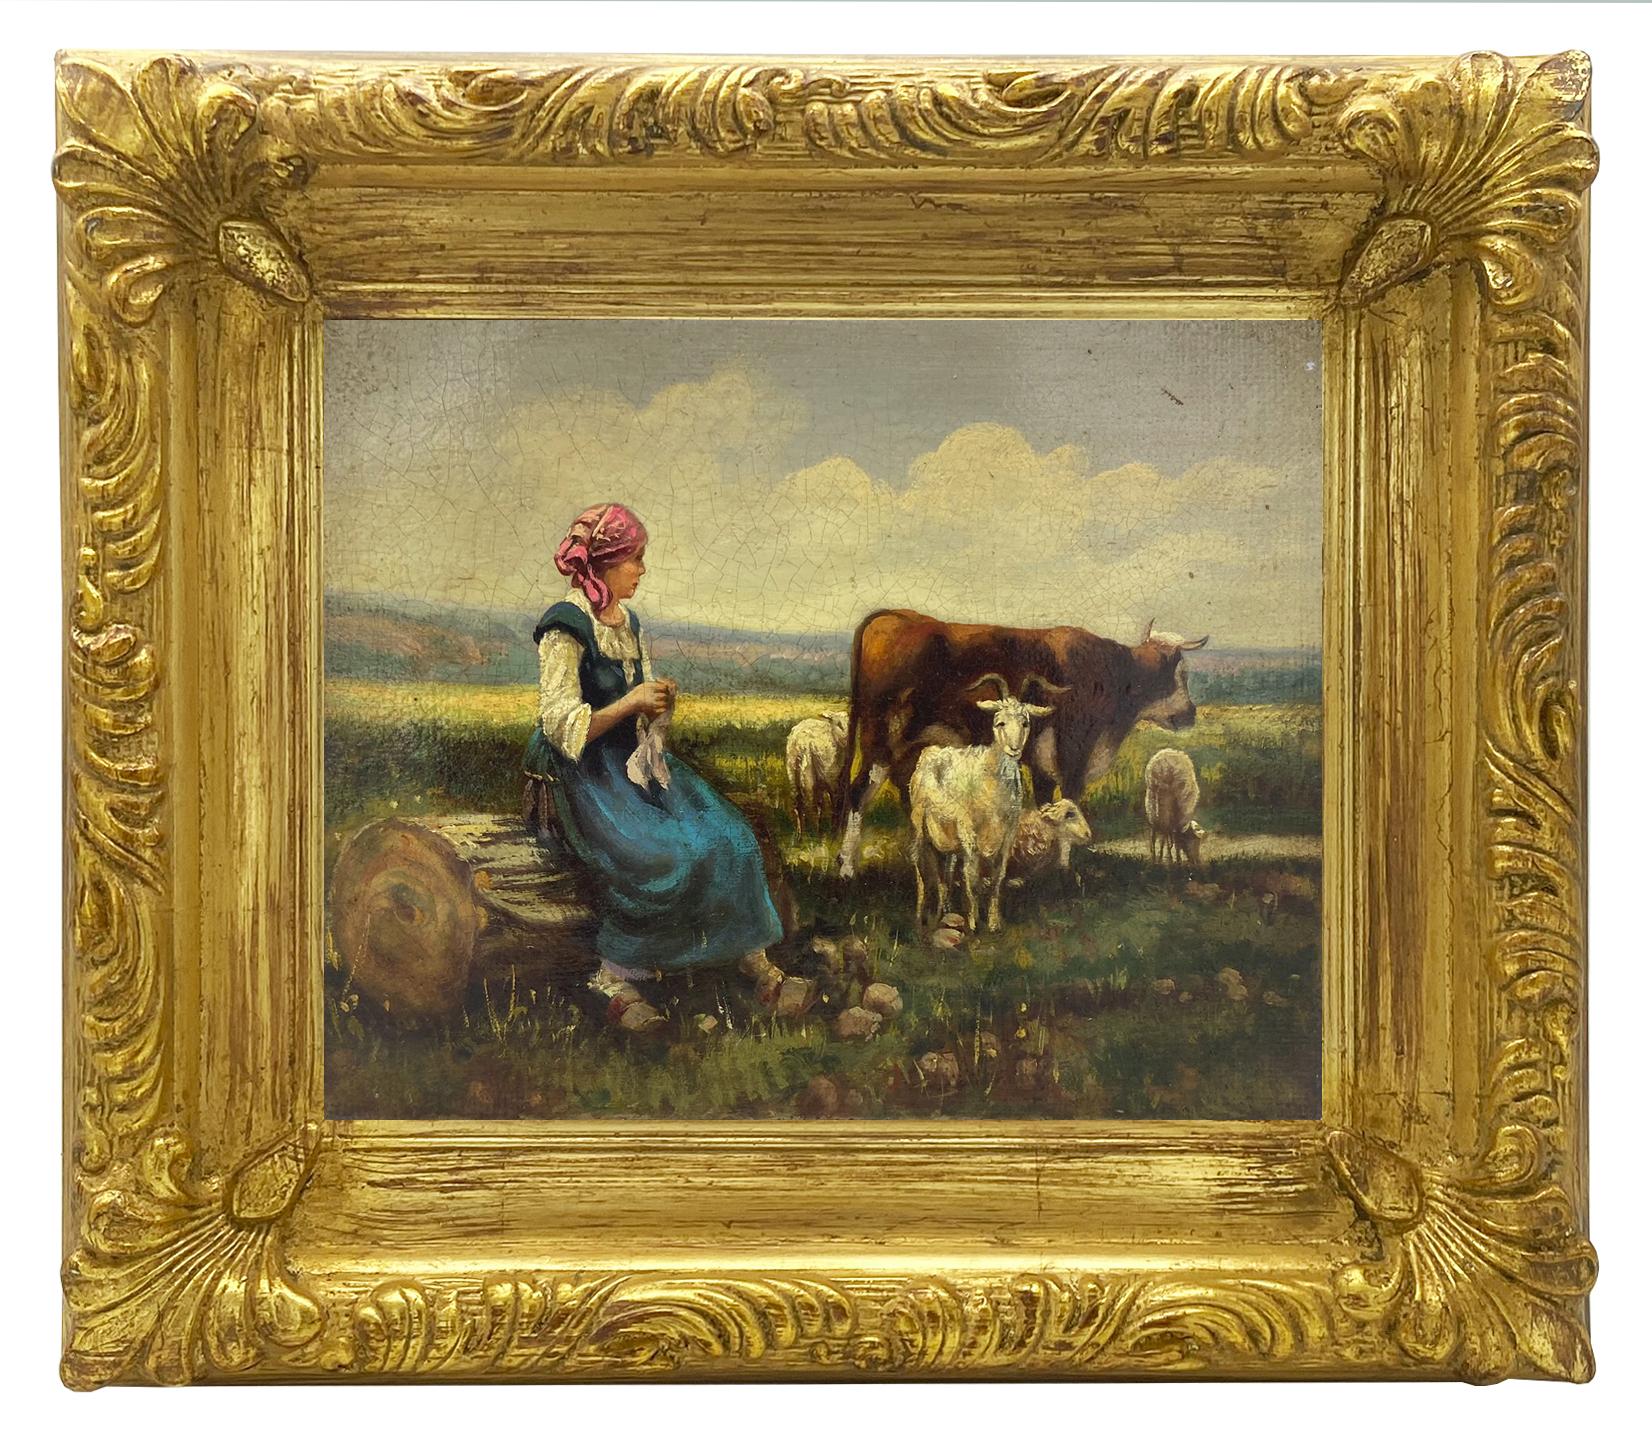 Ciro De Rosa Landscape Painting - COUNTRY SCENE - In the Manner of Julien Dupre' -Italian Oil on Canvas Painting